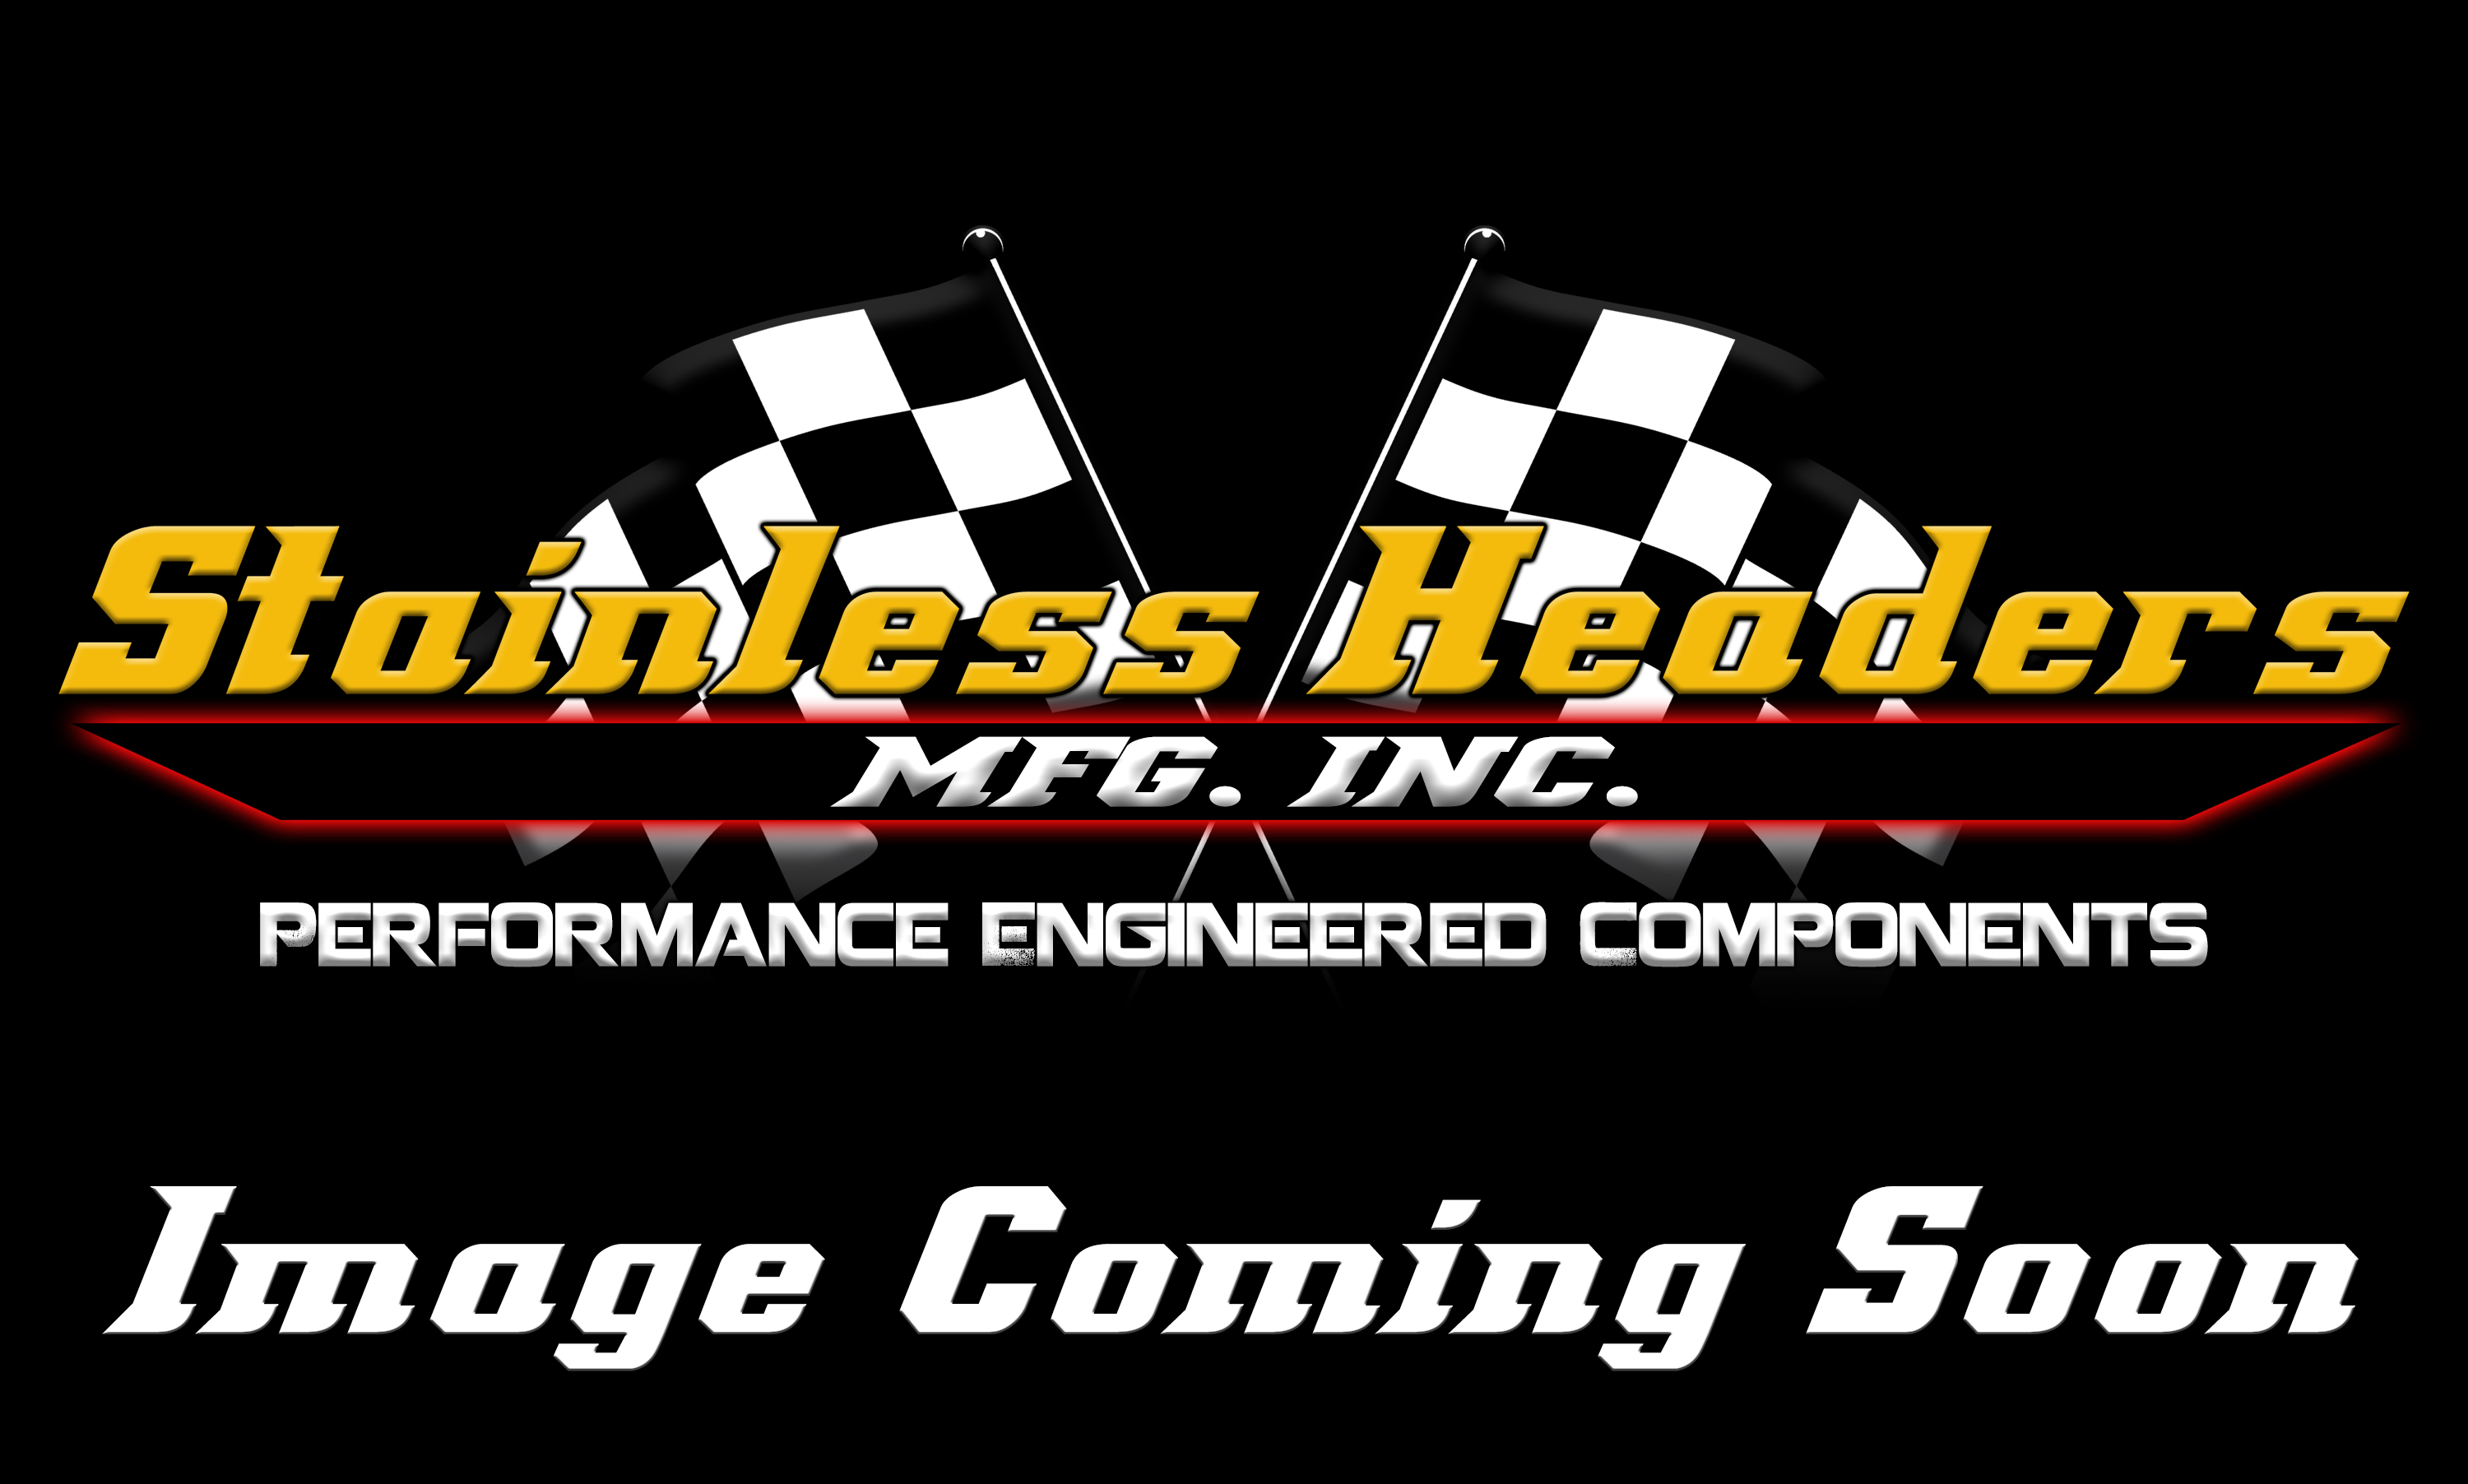 Stainless Headers - 2 1/4" Primary 6 into 1 Performance Merge Collector-16ga 304ss